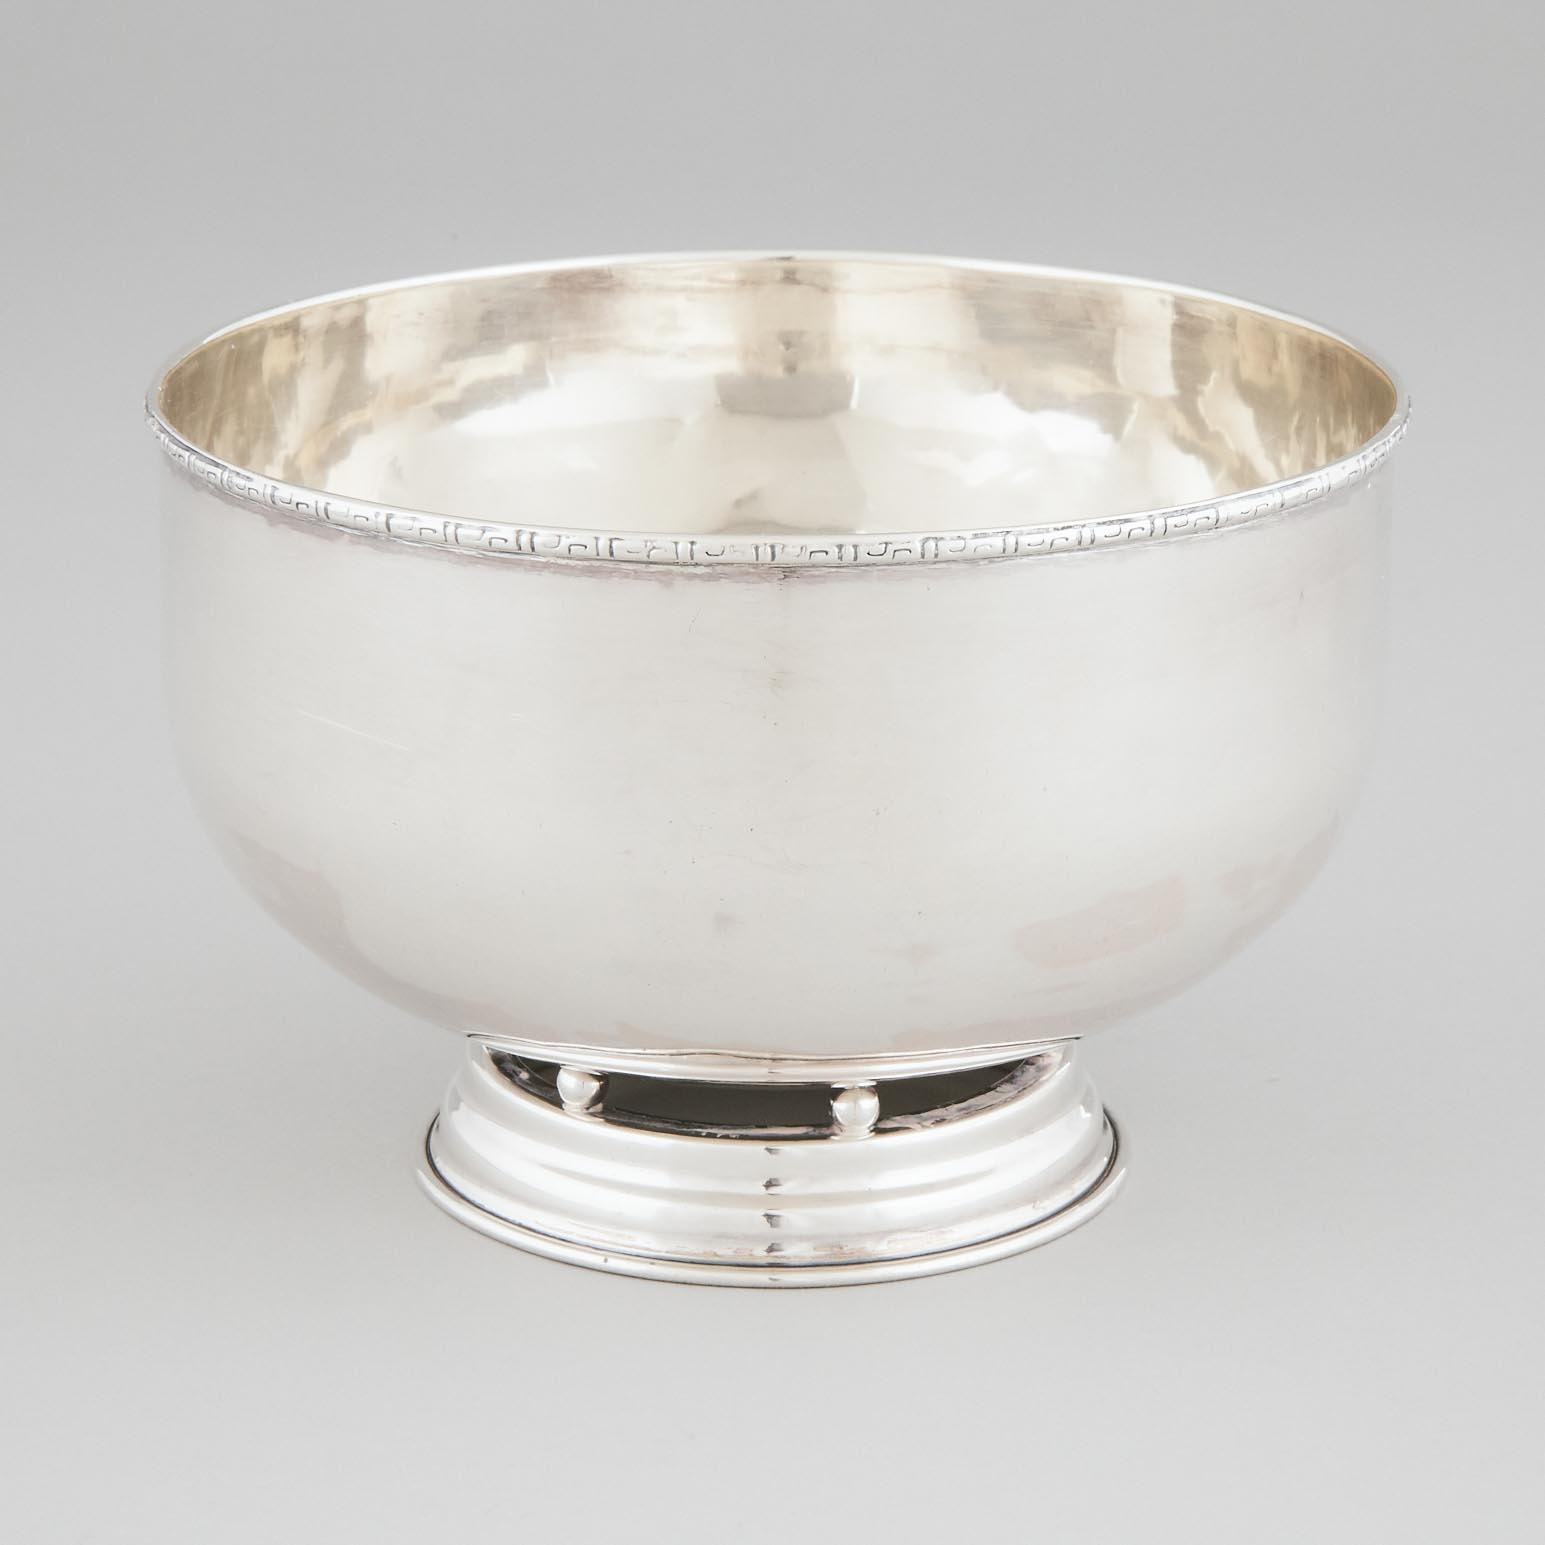 Canadian Silver Bowl, Carl Poul Petersen, Montreal, Que., mid-20th century